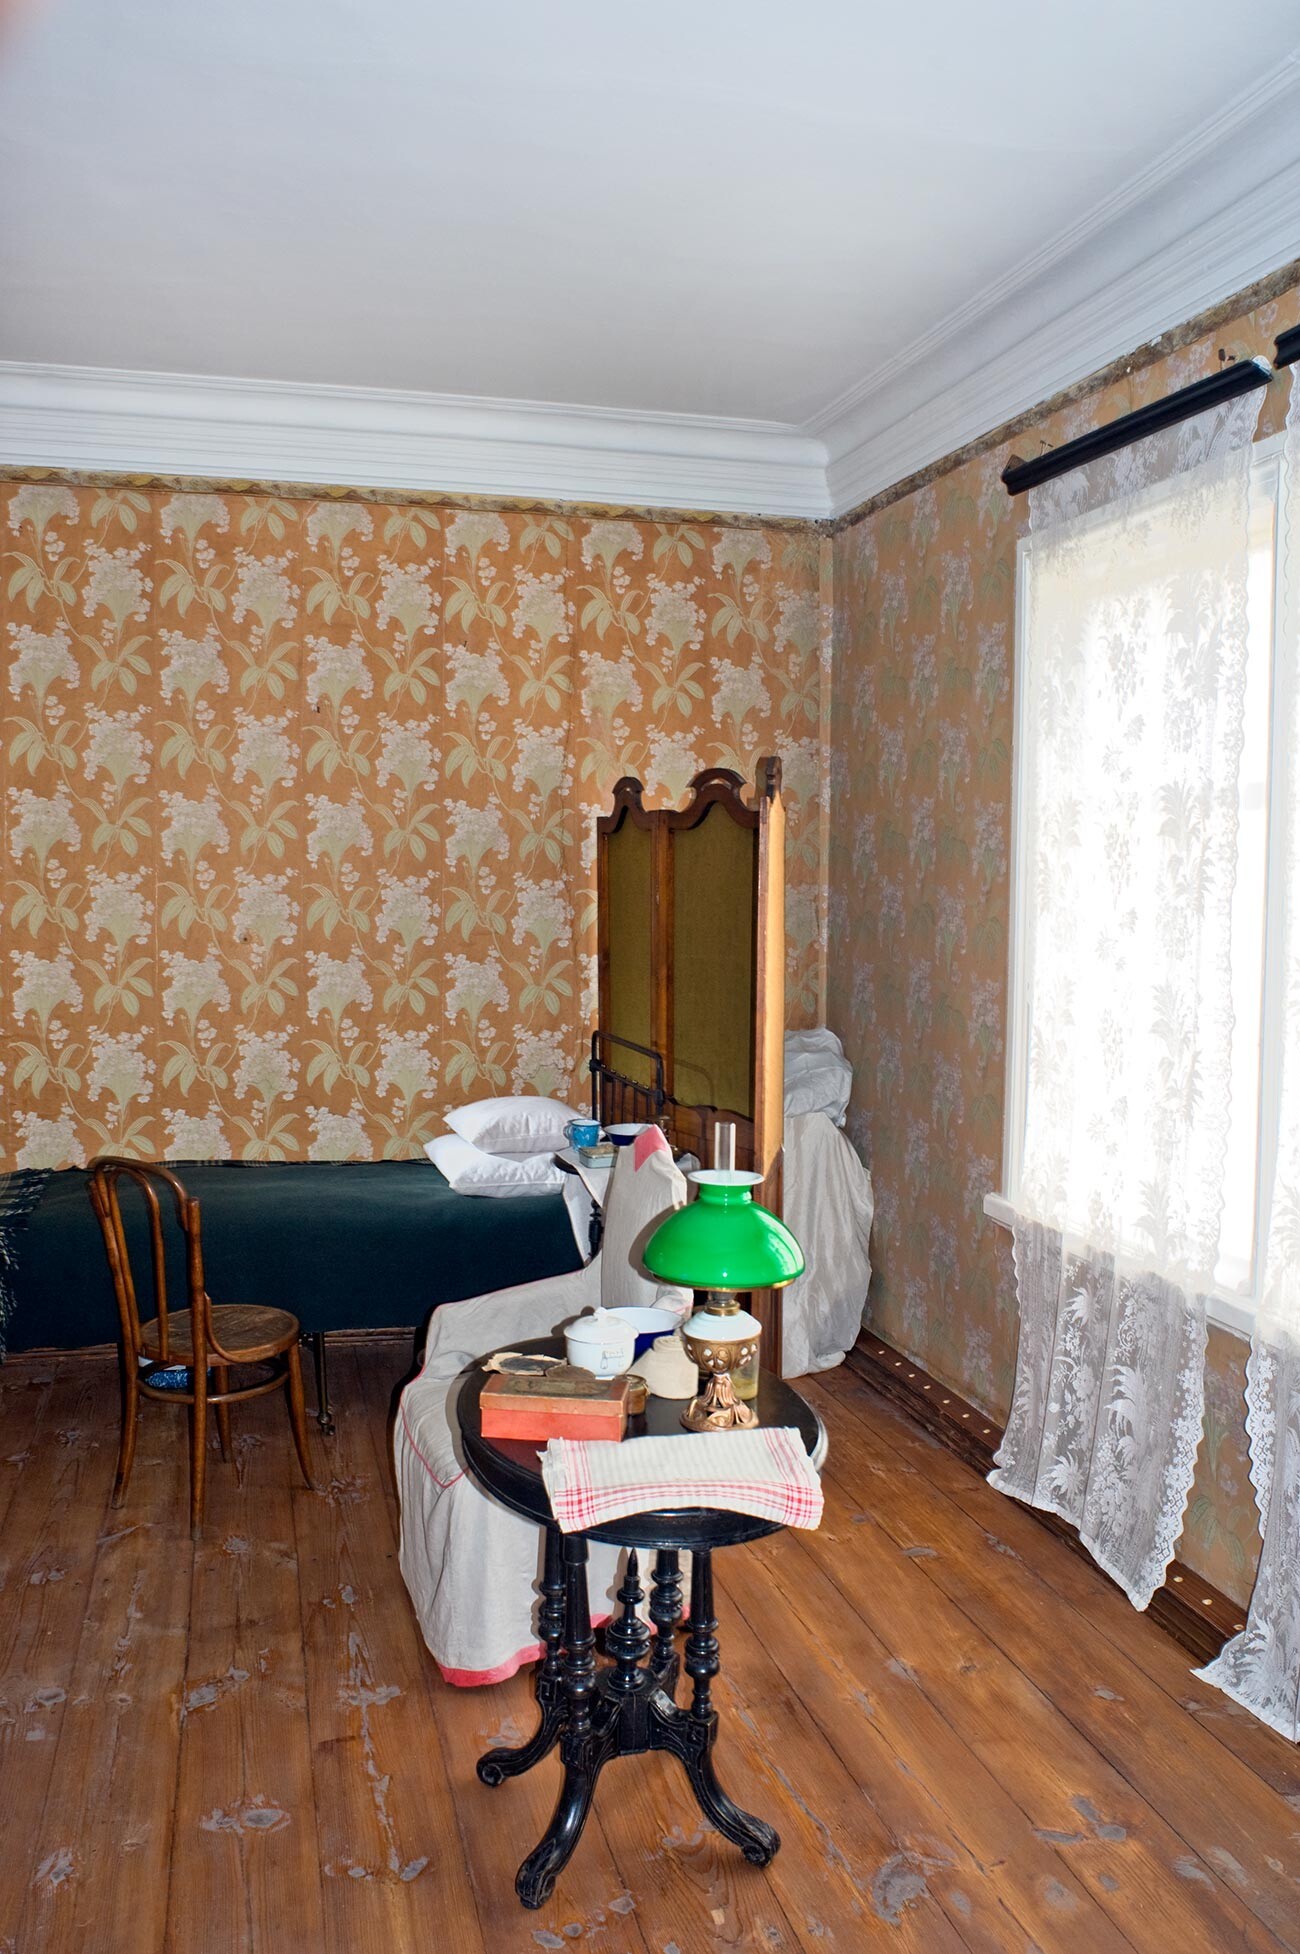 Stationmaster's house, interior. View from main entrance of room where Tolstoy lay. Right: window through which his wife Sofya looked from the outside. August 10, 2013